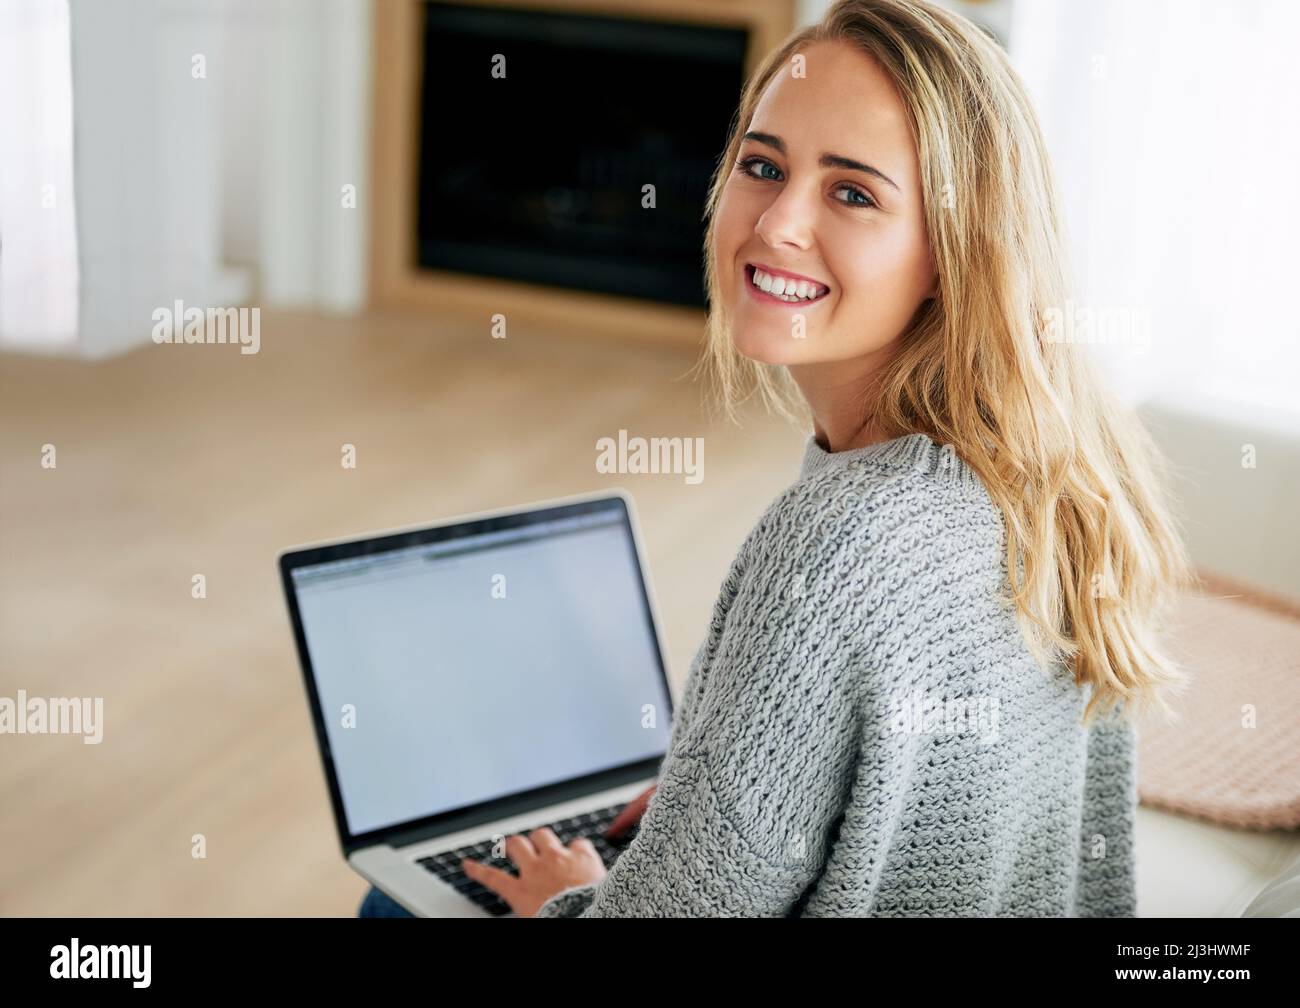 Blogging is great. High angle portrait of an attractive young woman using her laptop at home. Stock Photo